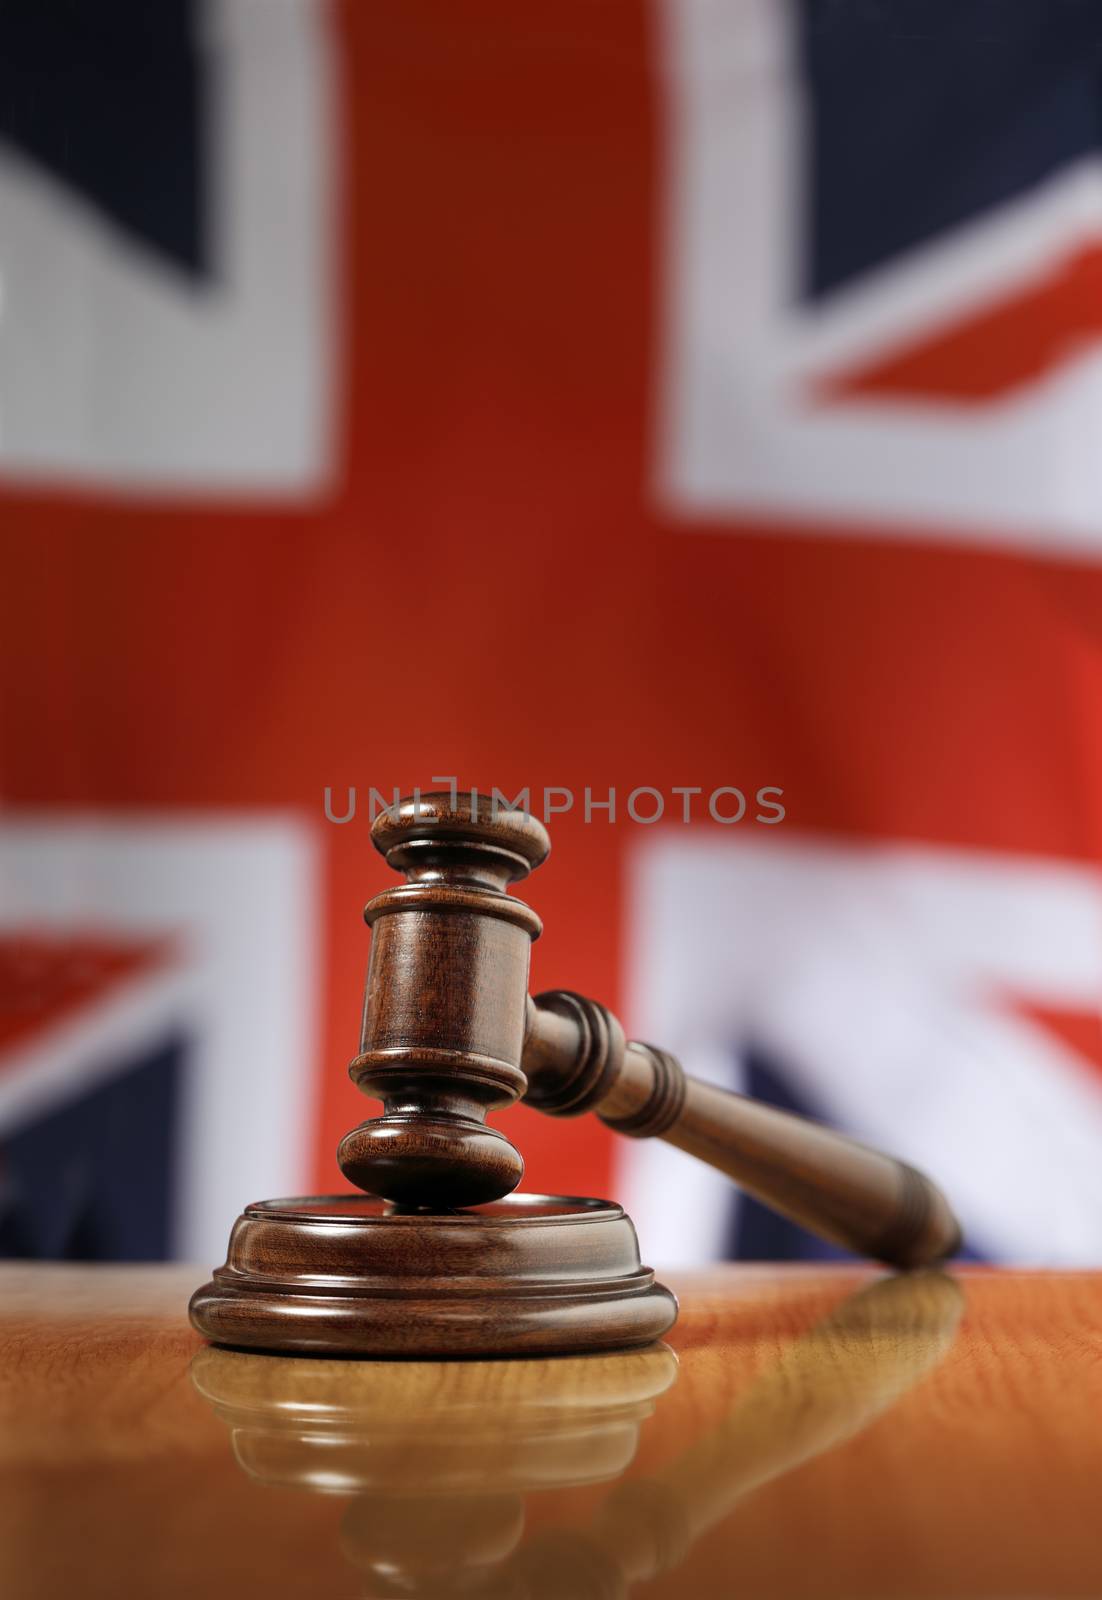 Mahogany wooden gavel on glossy wooden table. Flag of United Kingdom in the background.